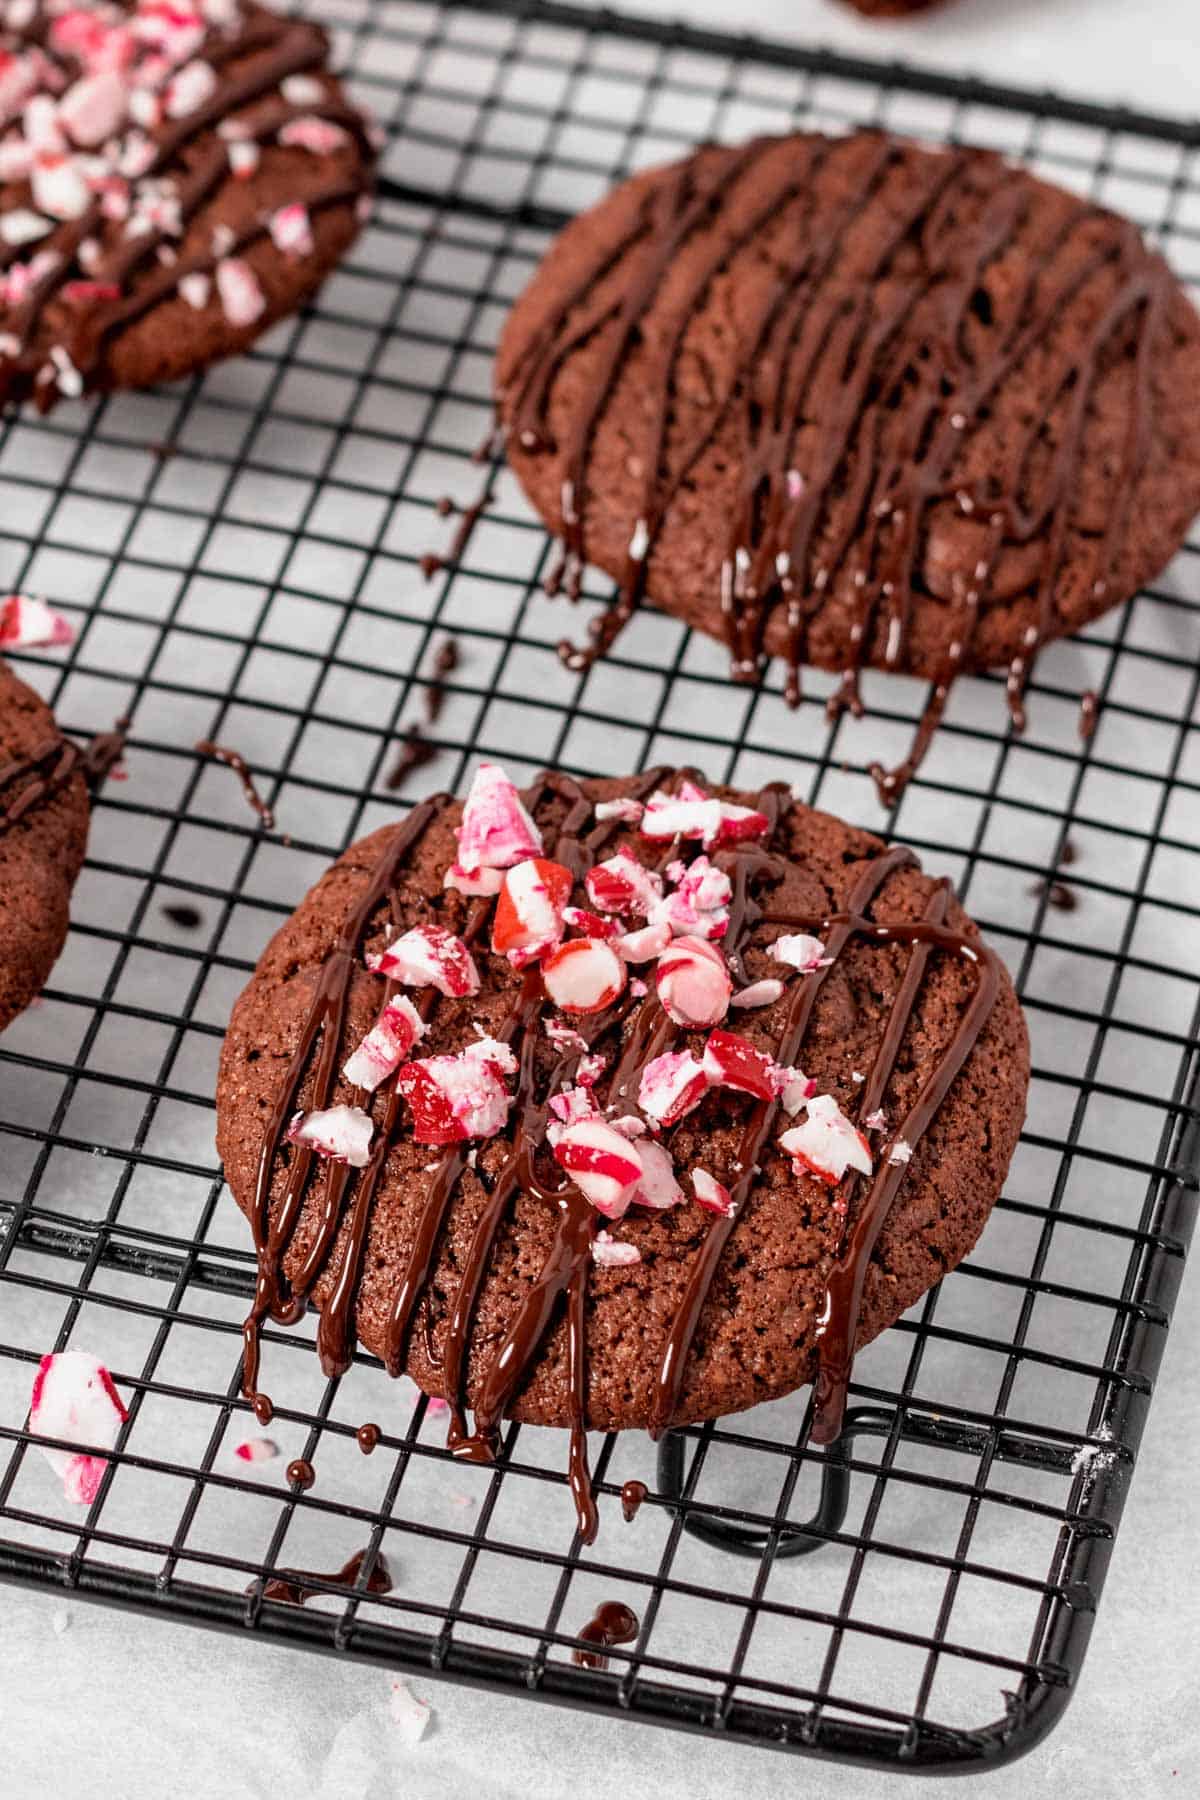 Gluten Free Chocolate Chip Cookies With Peppermint ona wire rack